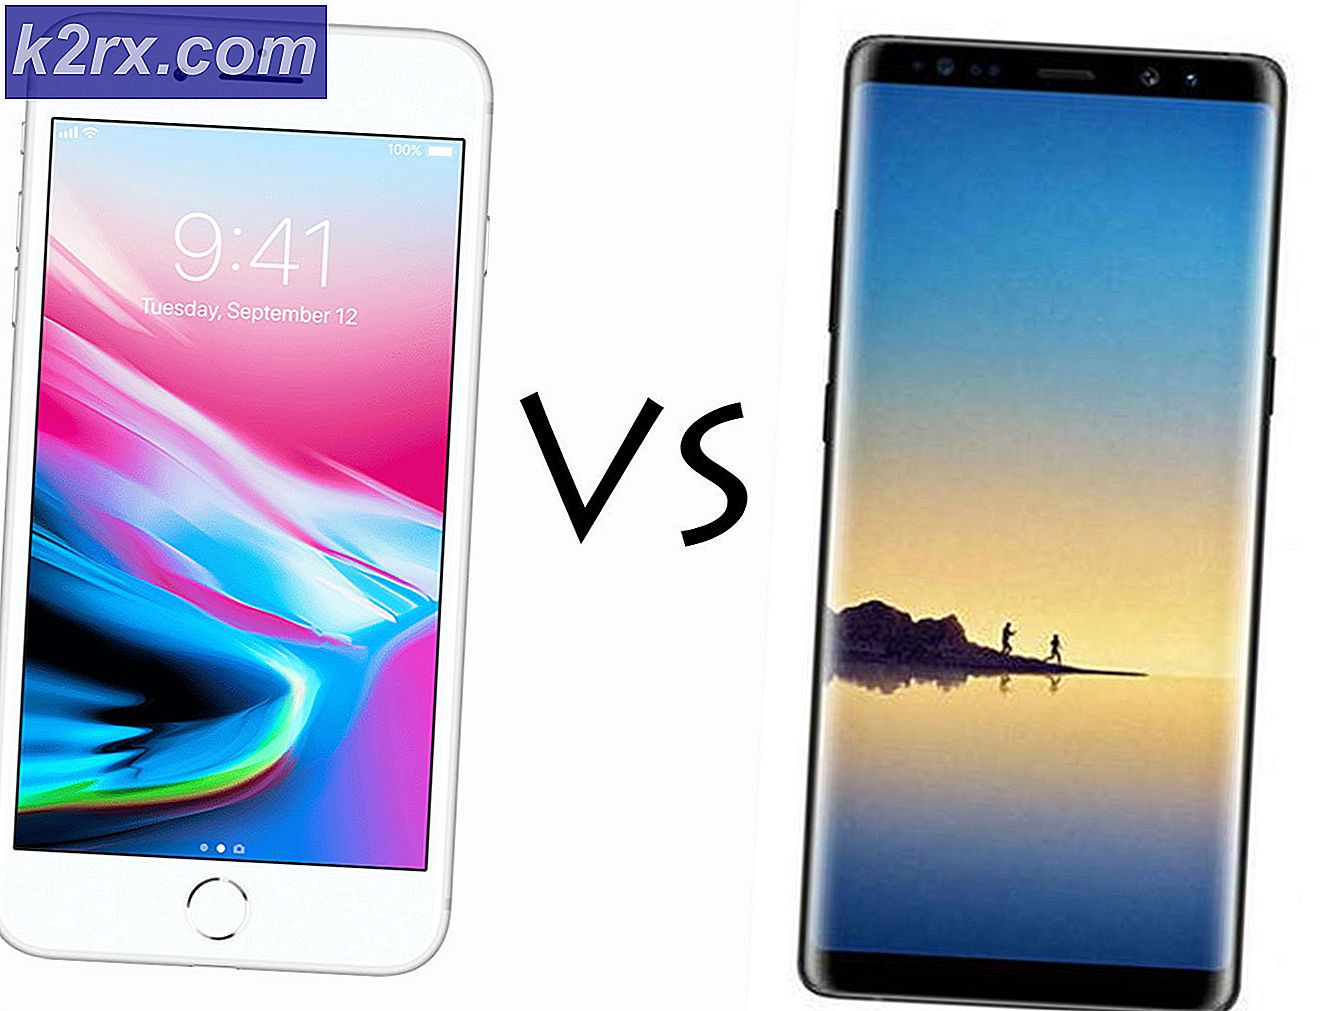 iPhone 8 Plus versus Samsung Galaxy Note 8: Phablet Category Duel